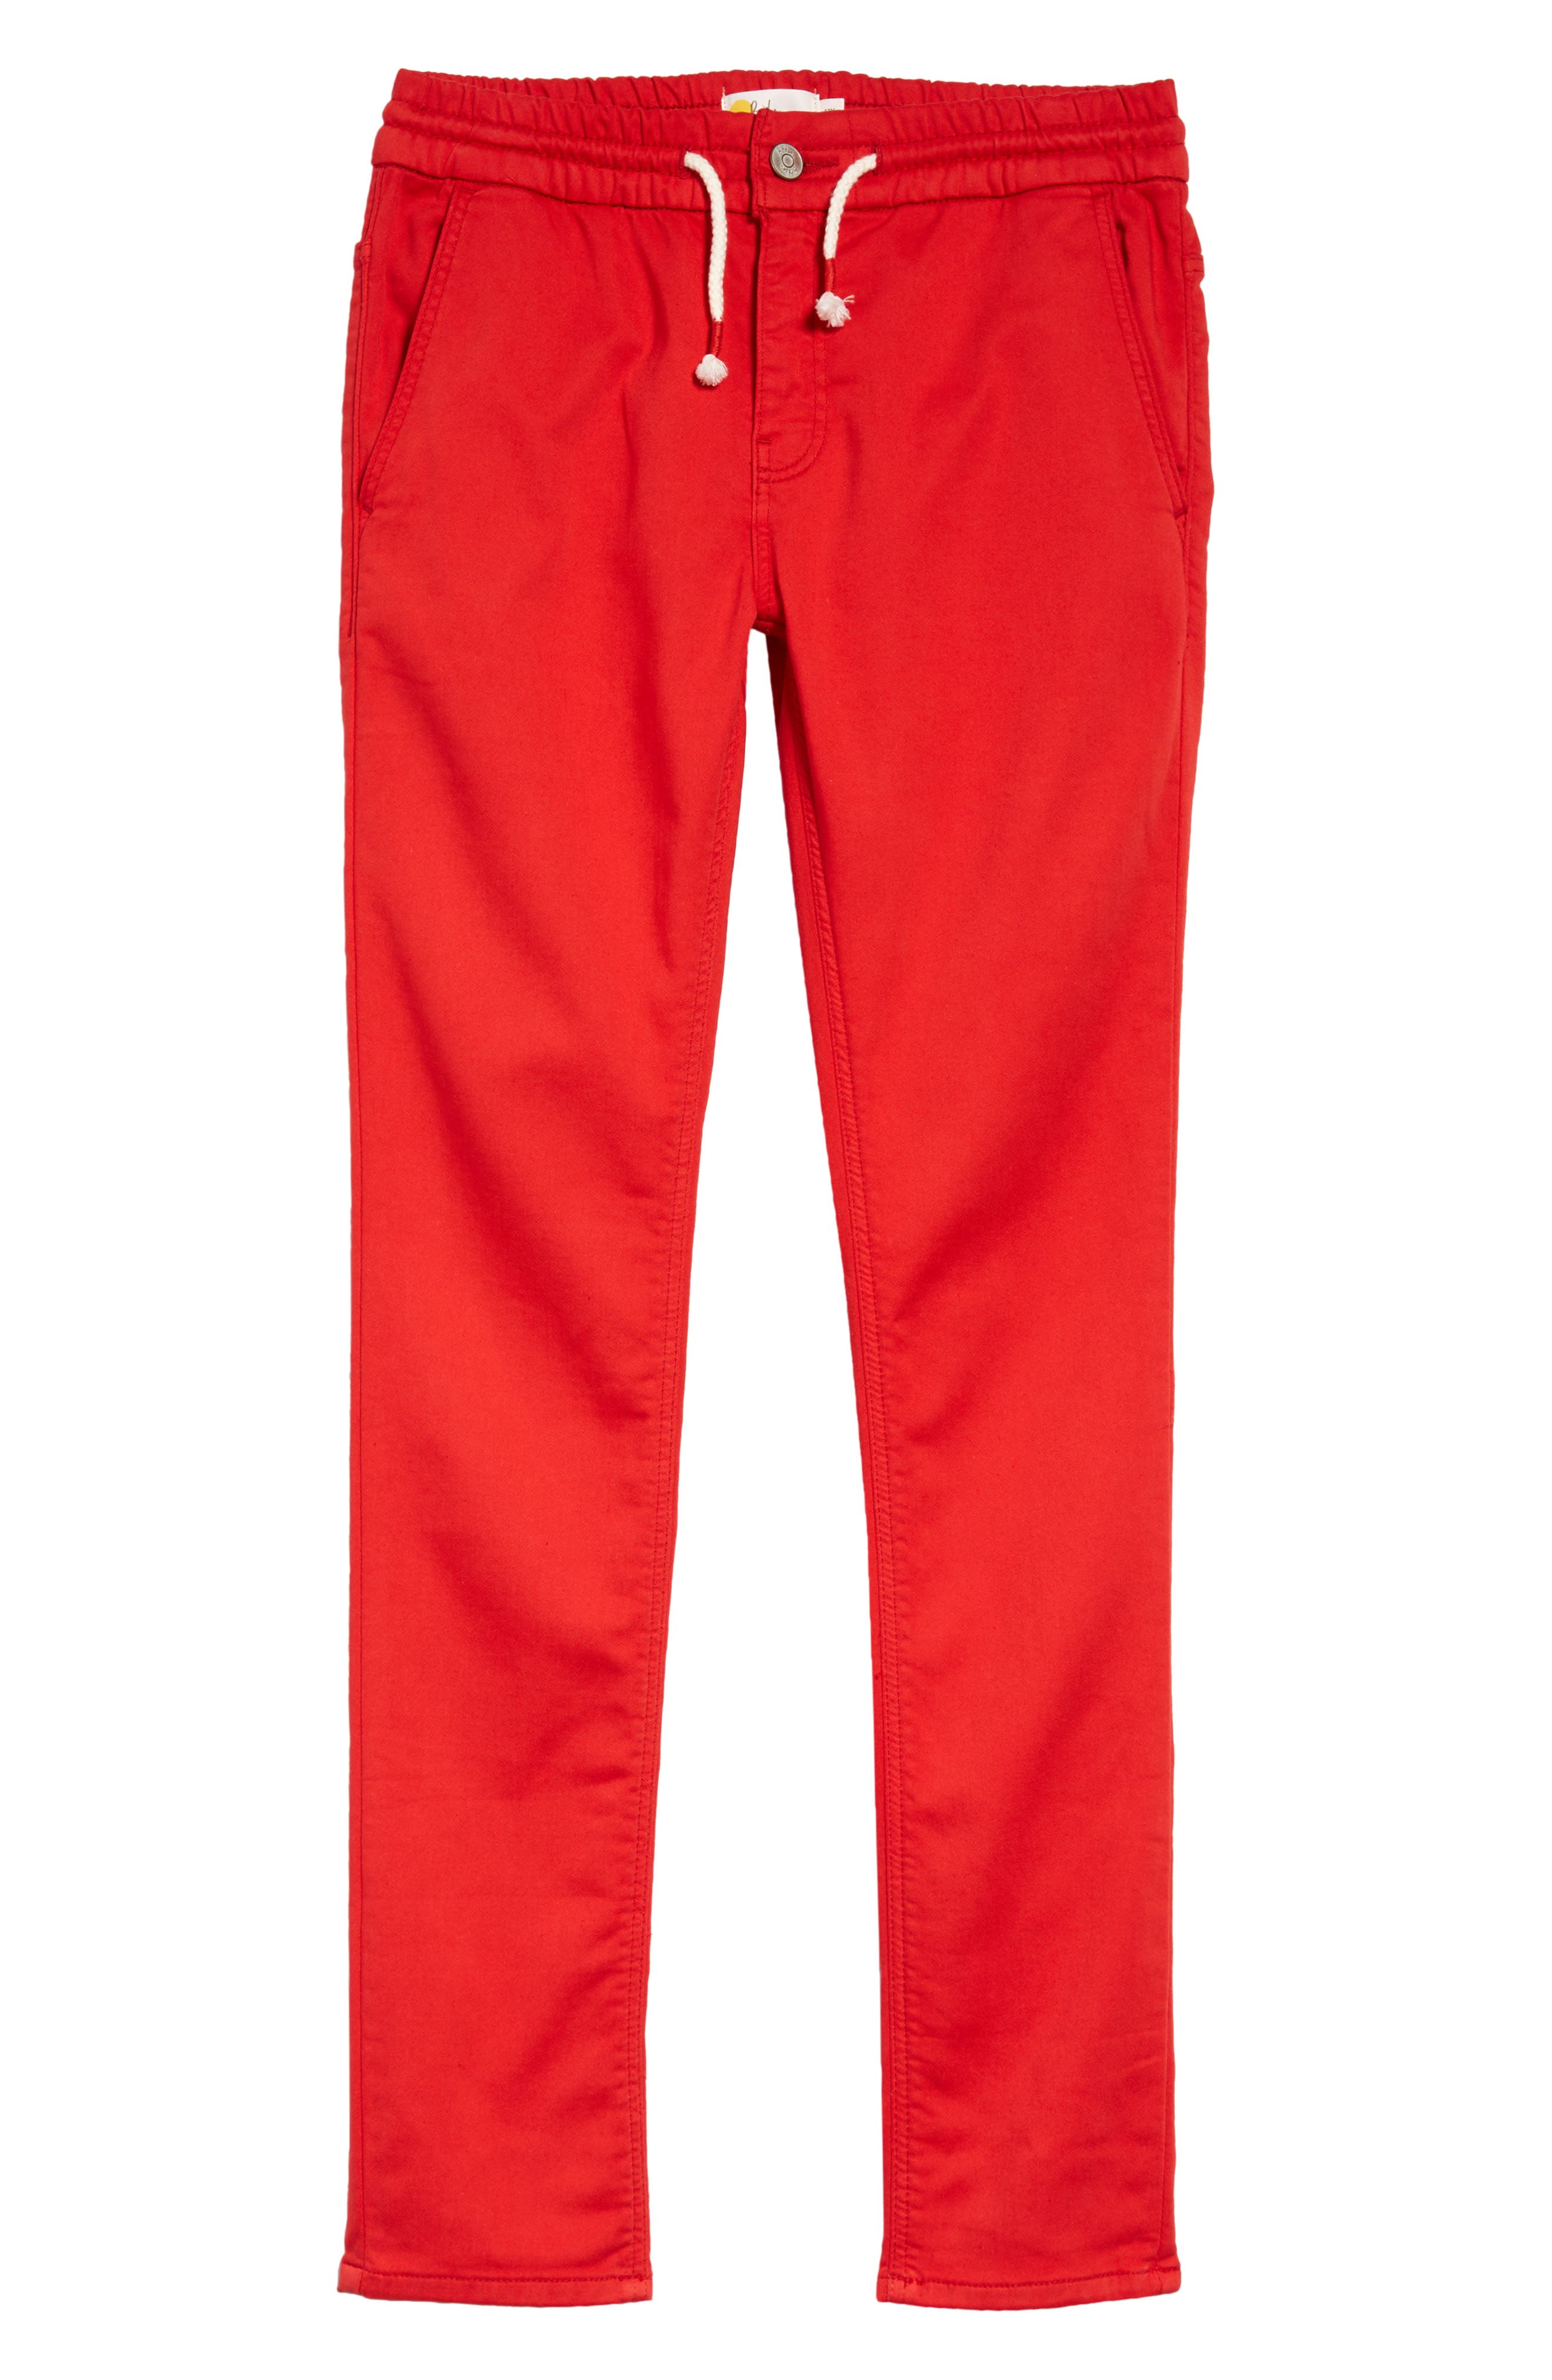 kids red jeans